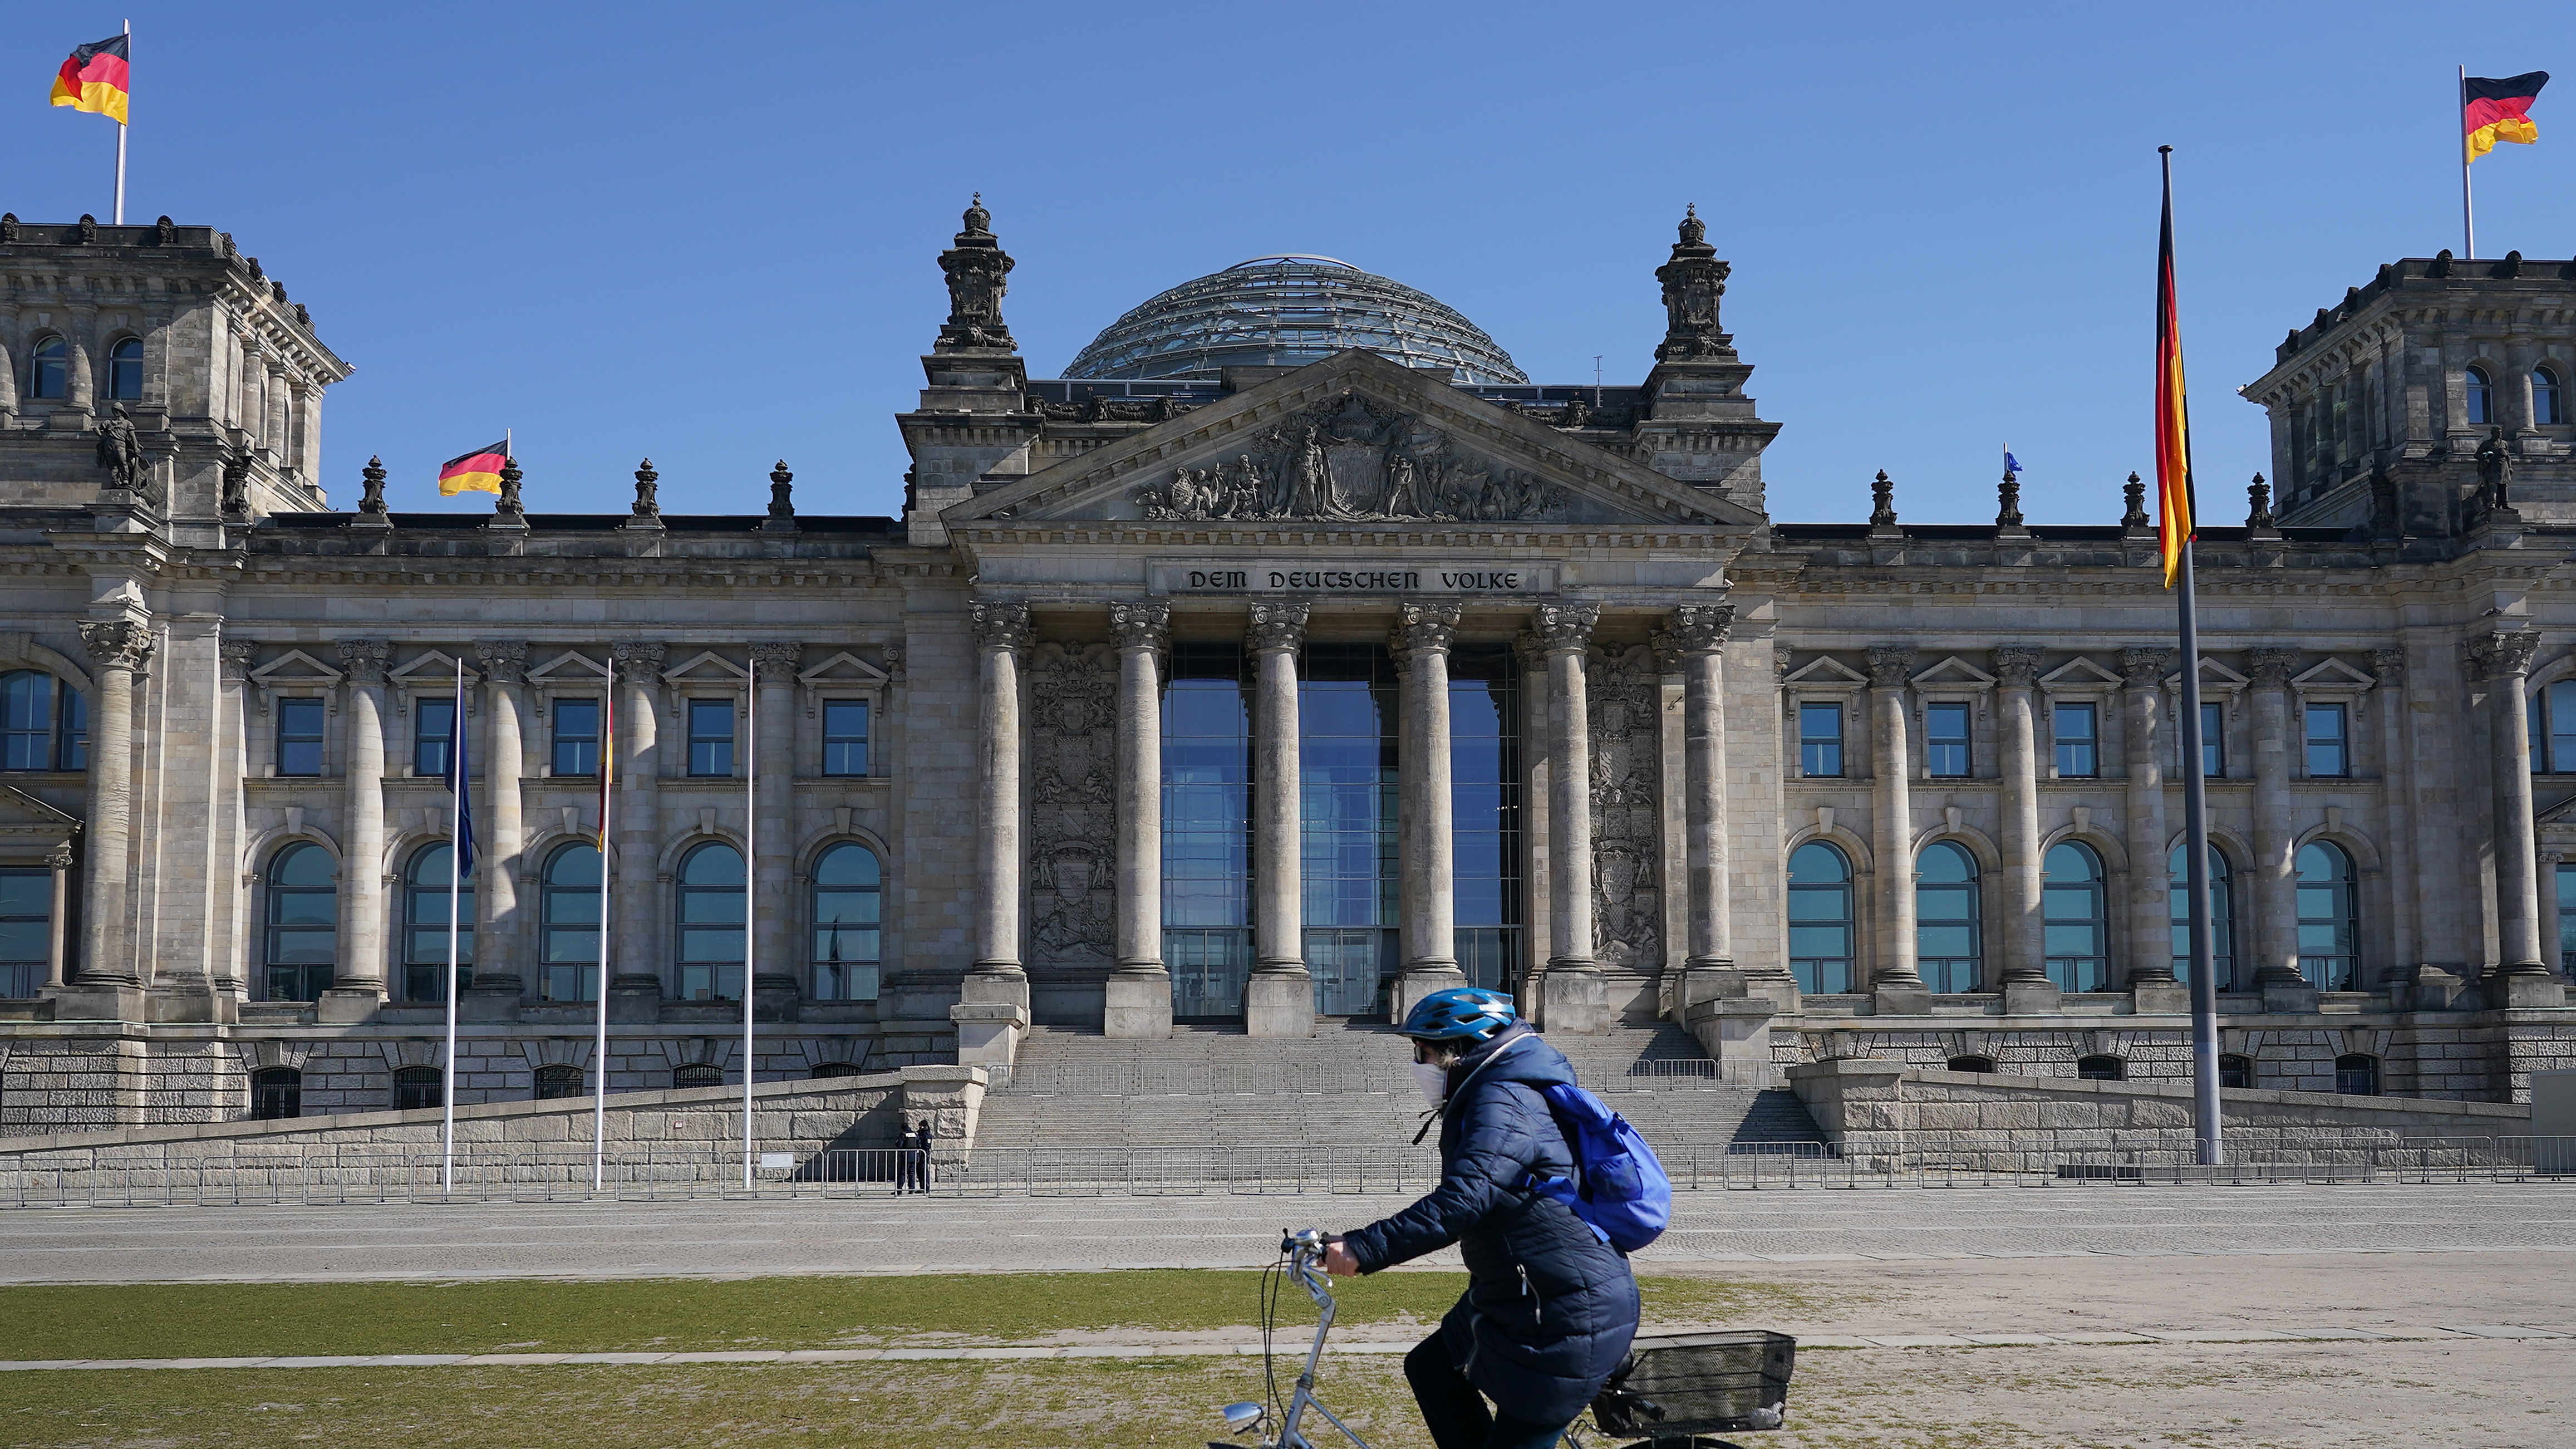 A woman cycles past the Reichstag in Berlin wearing a face mask in March 2020